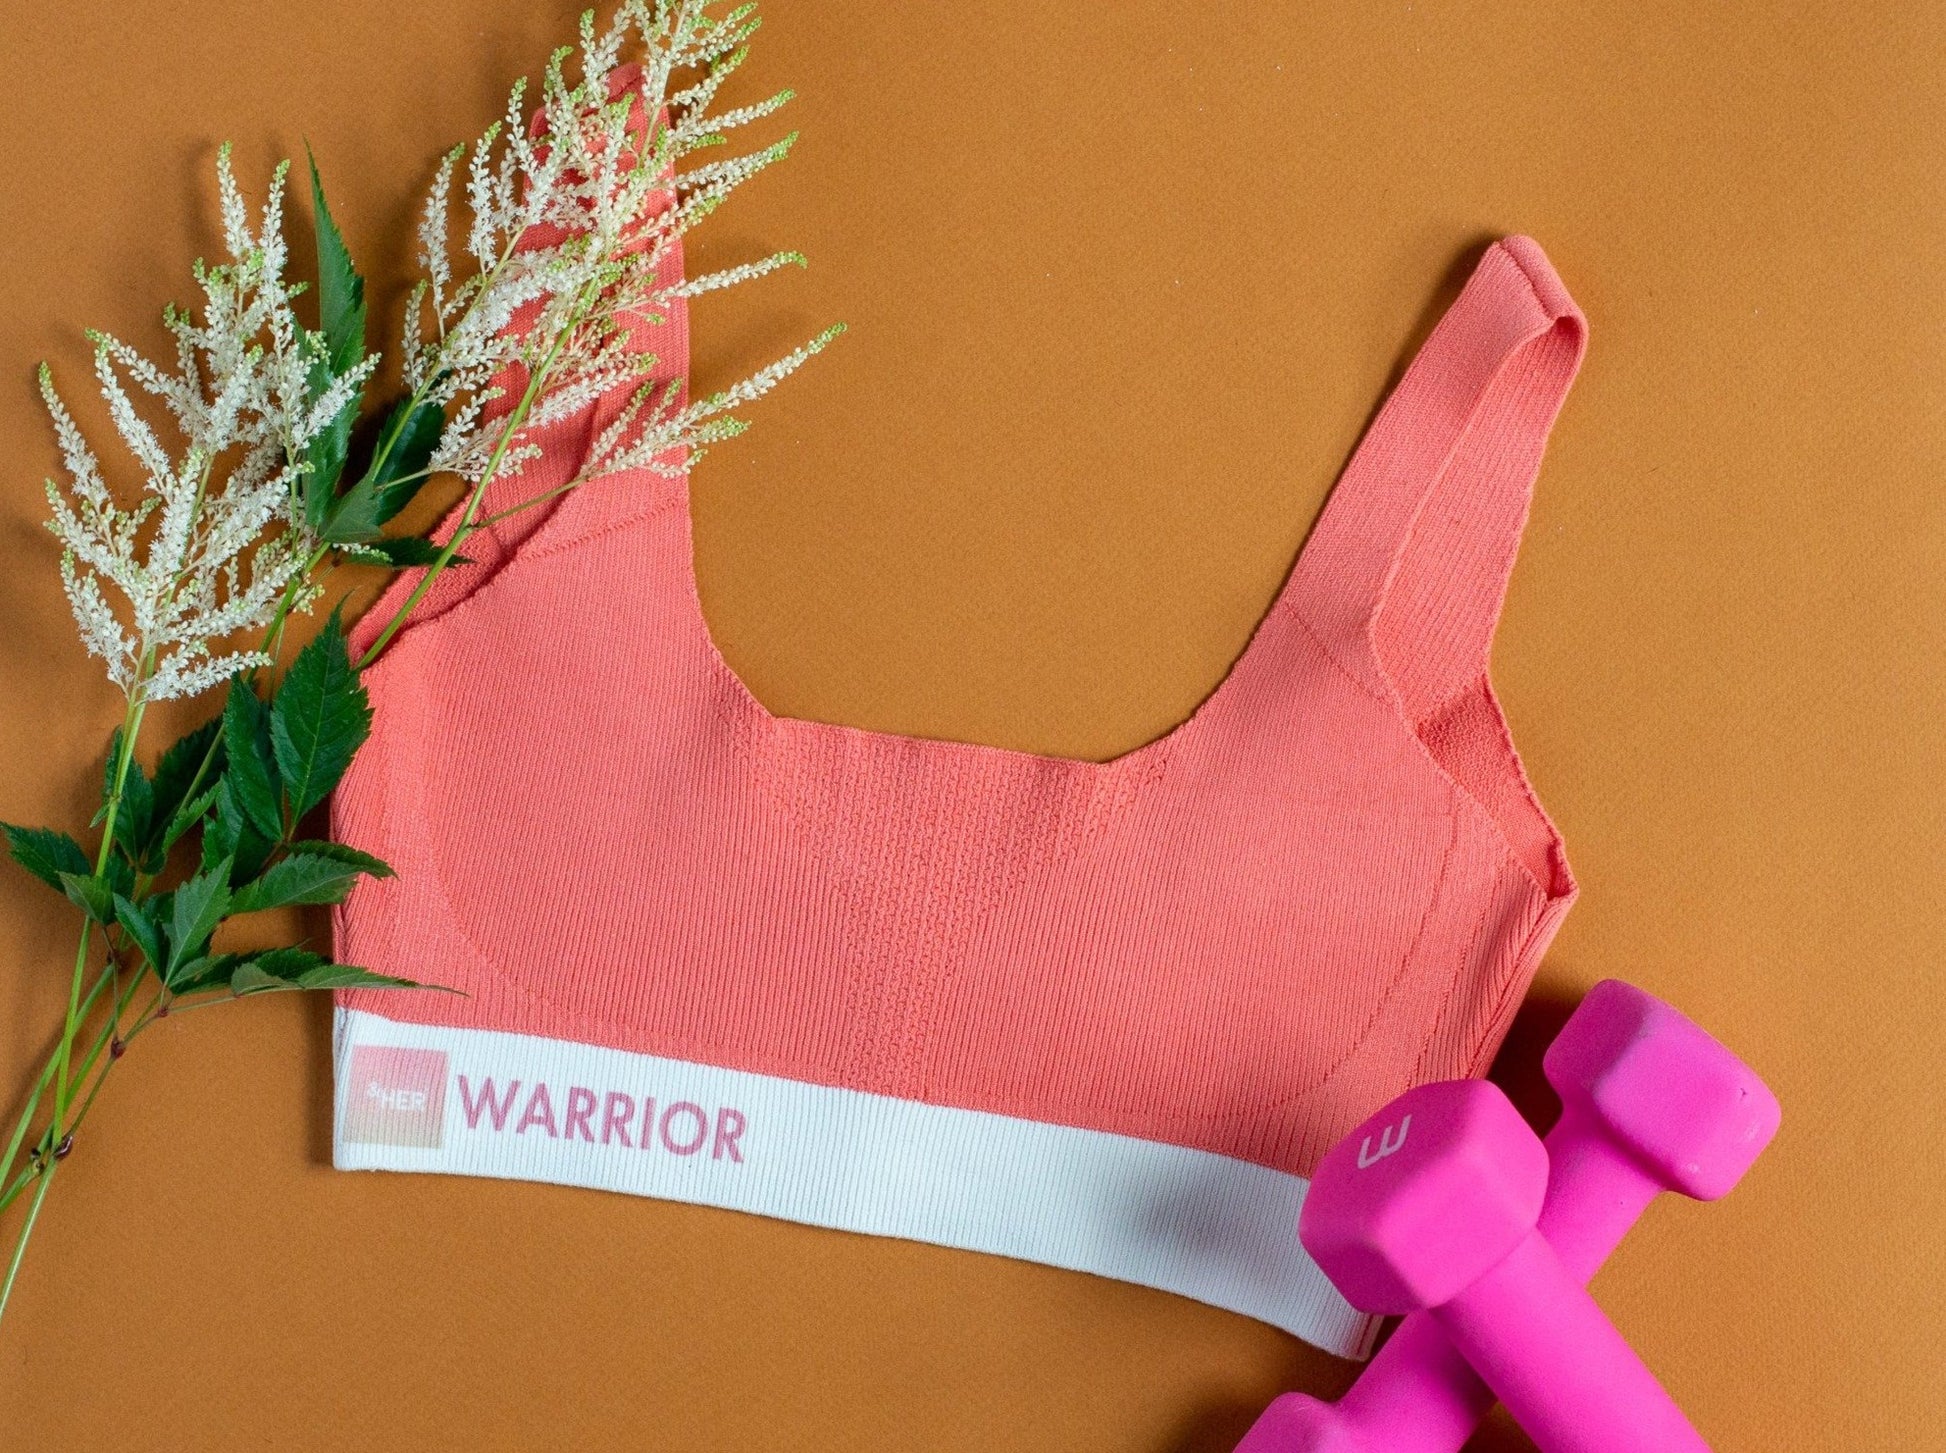 &Her customized bra in Fiesta with WARRIOR print. This bra is customized, tailor made, and personalized.